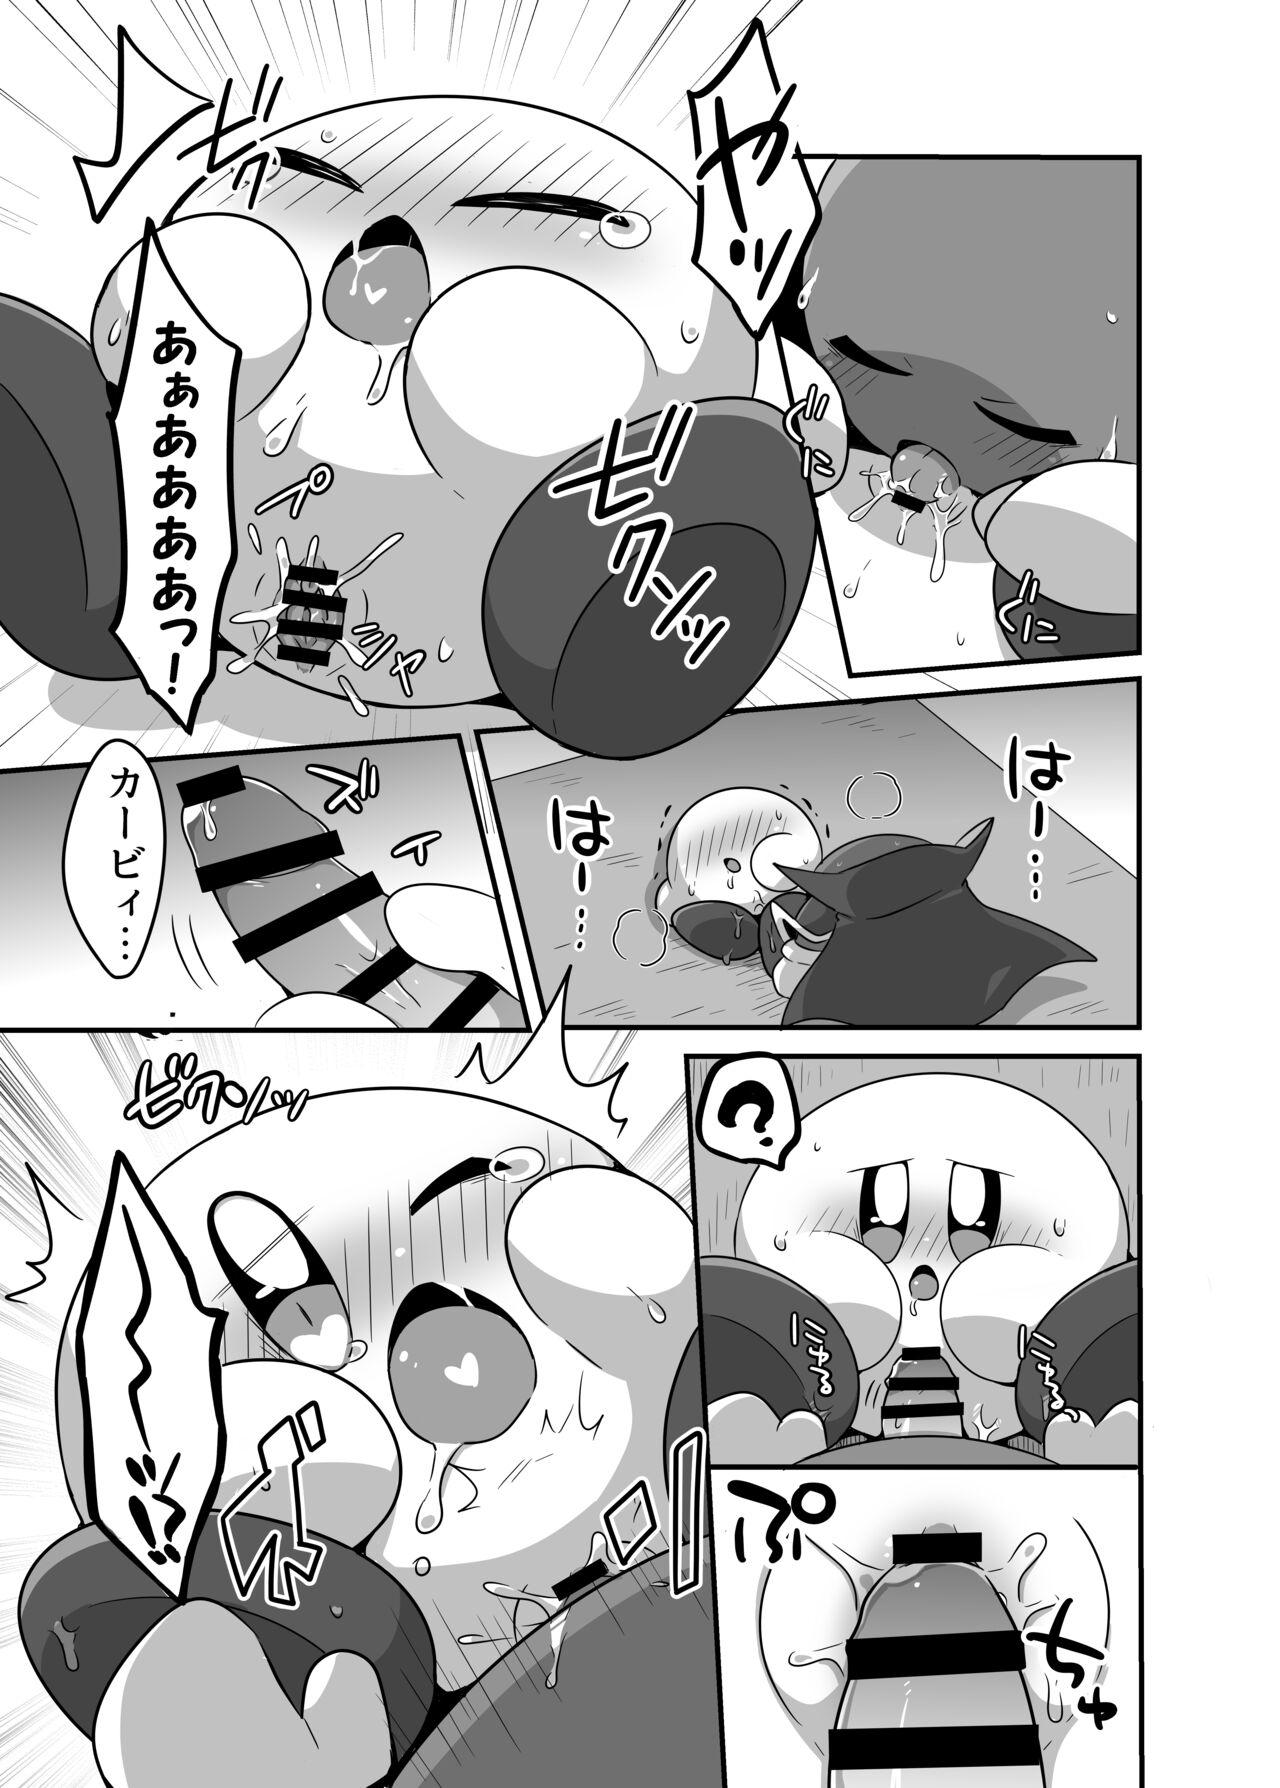 Blows I Want to Do XXX Even For Spheres! - Kirby Cojiendo - Page 11